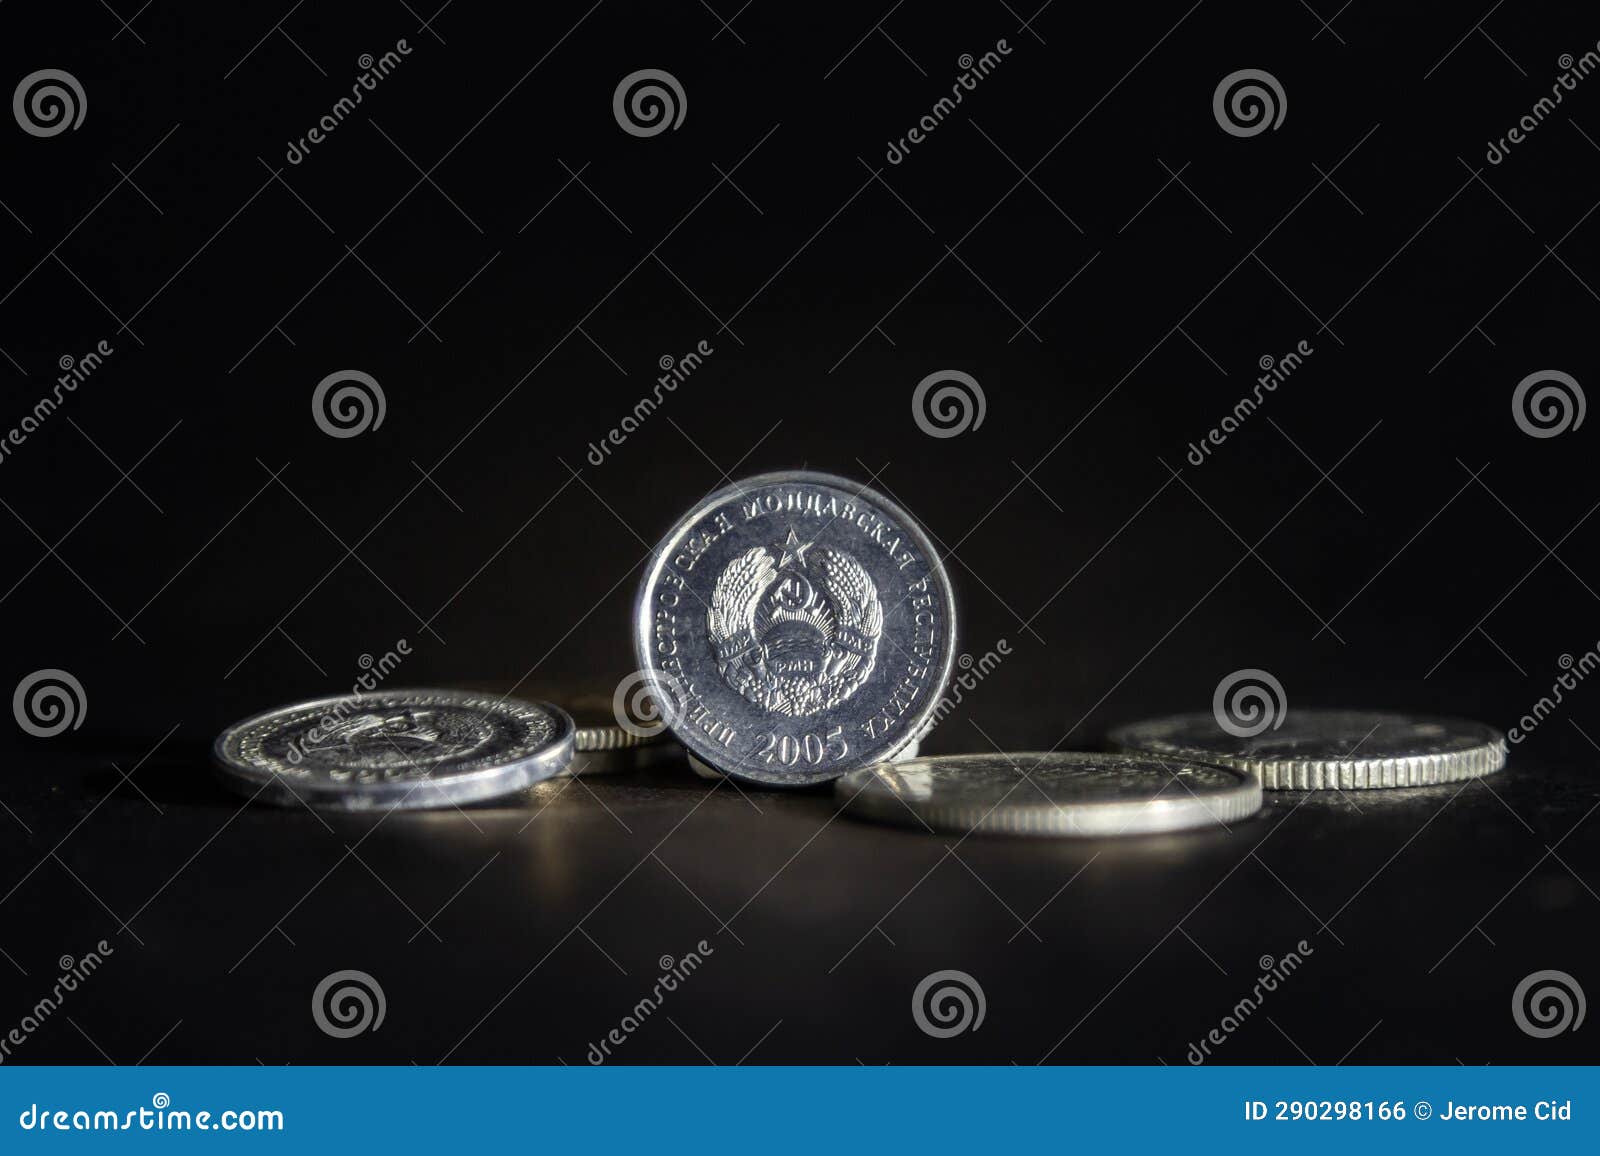 selective blur on coins of transnistrian rubles with the soviet coat of arms of transnistria with soviet hammer and sickle. it is